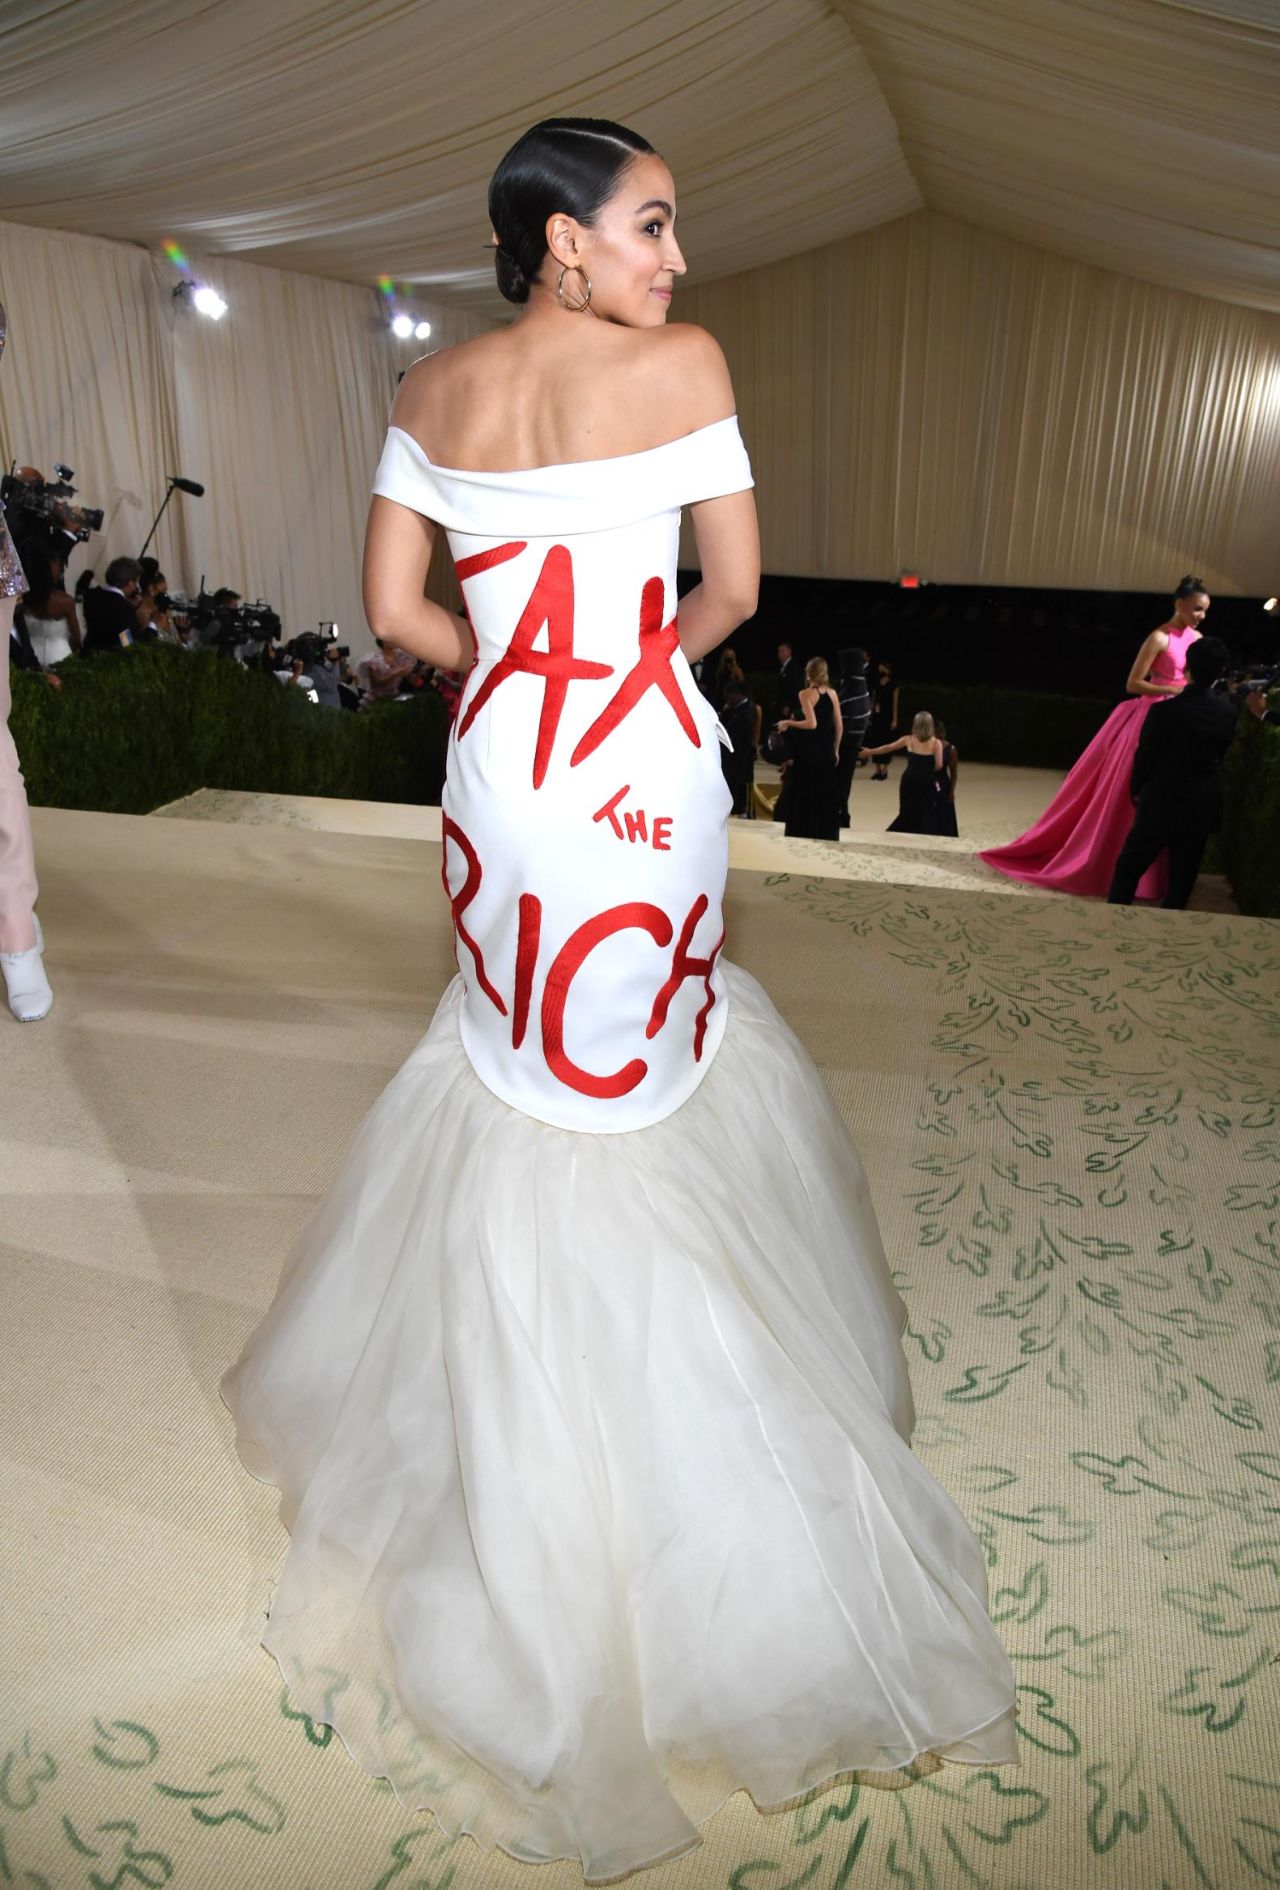 New York Congresswoman Alexandria Ocasio-Cortez made the statement "Tax the Rich" through a white tulle-hemmed mermaid gown by Brooklyn-based designer Brother Vellies.